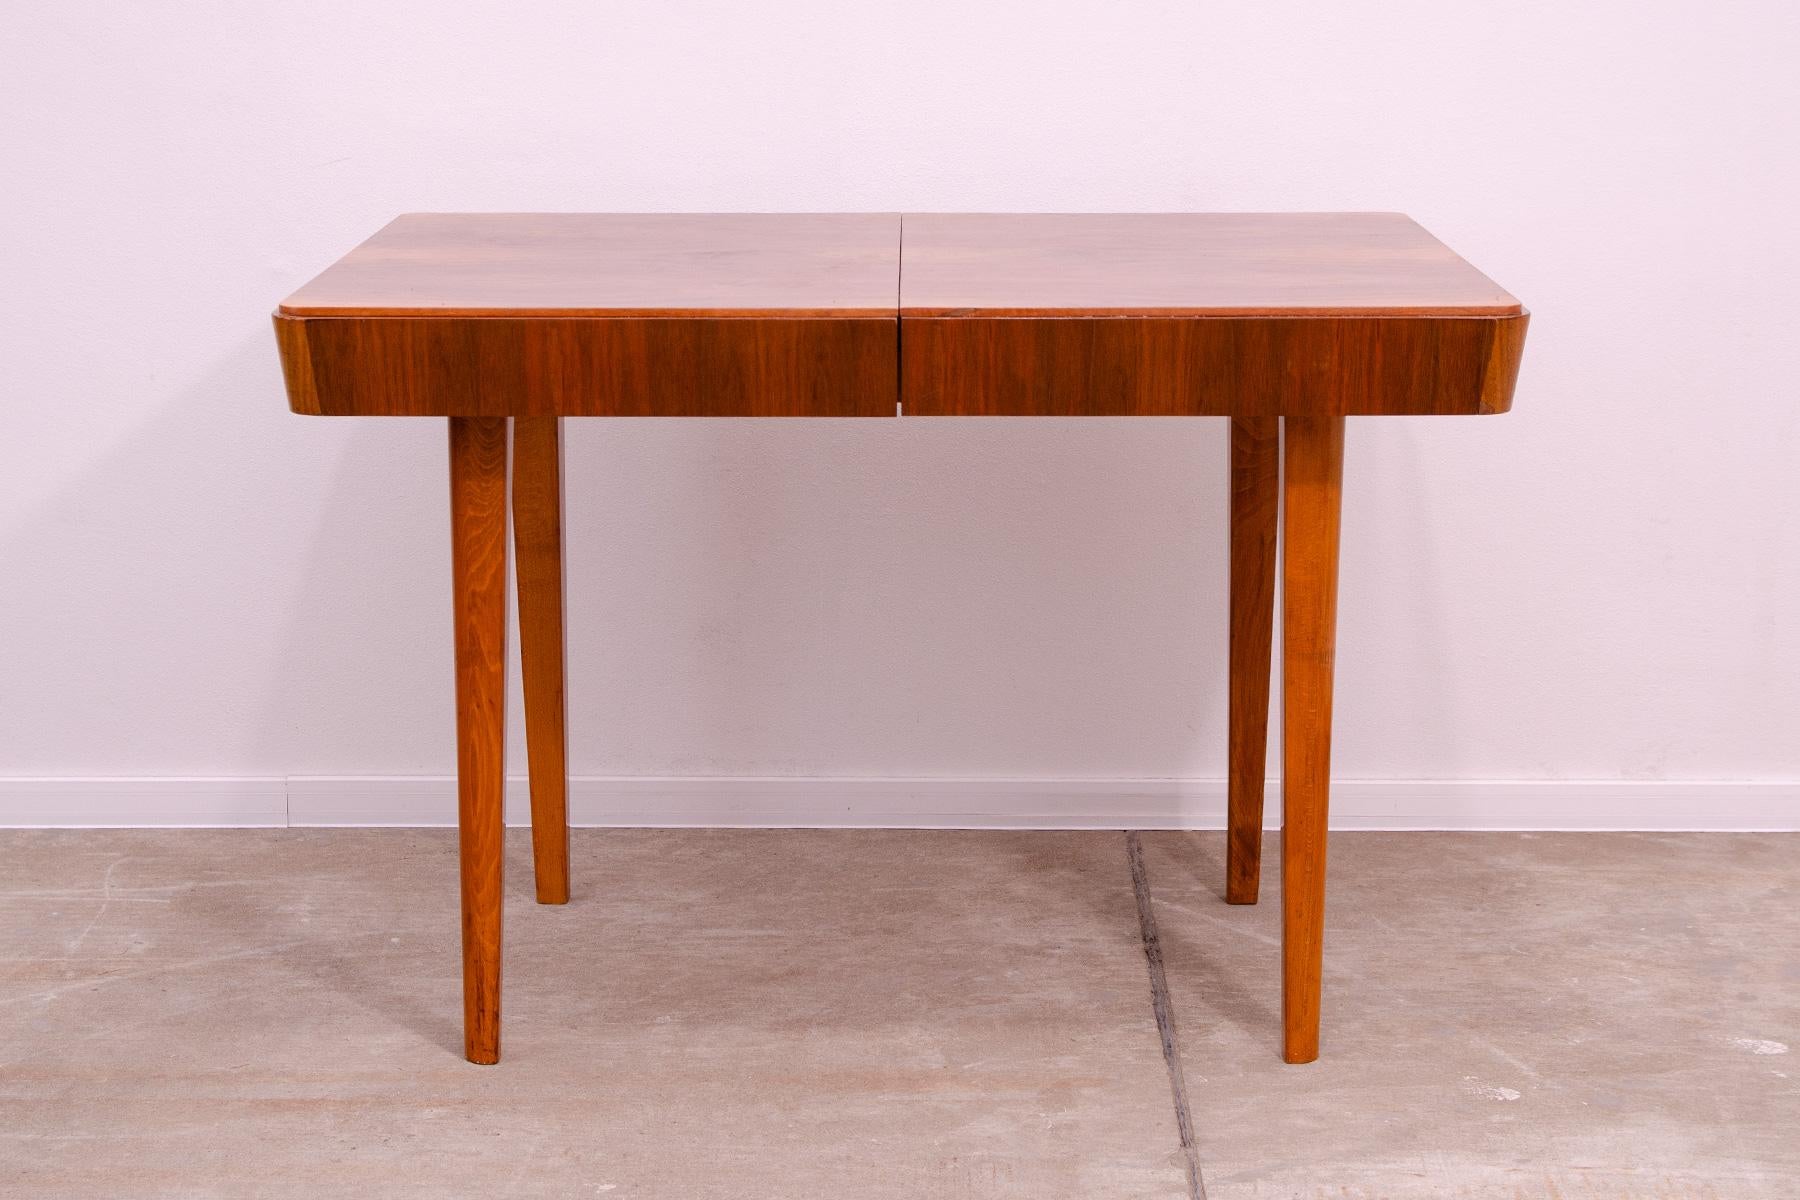 This adjustable dining table was designed and made by Setona company in the 1950s in the former Czechoslovakia. It´s made of walnut. The table is in very good condition, it was completely renovated in the recent past.

Height: 78 cm

tabletop: 116 x